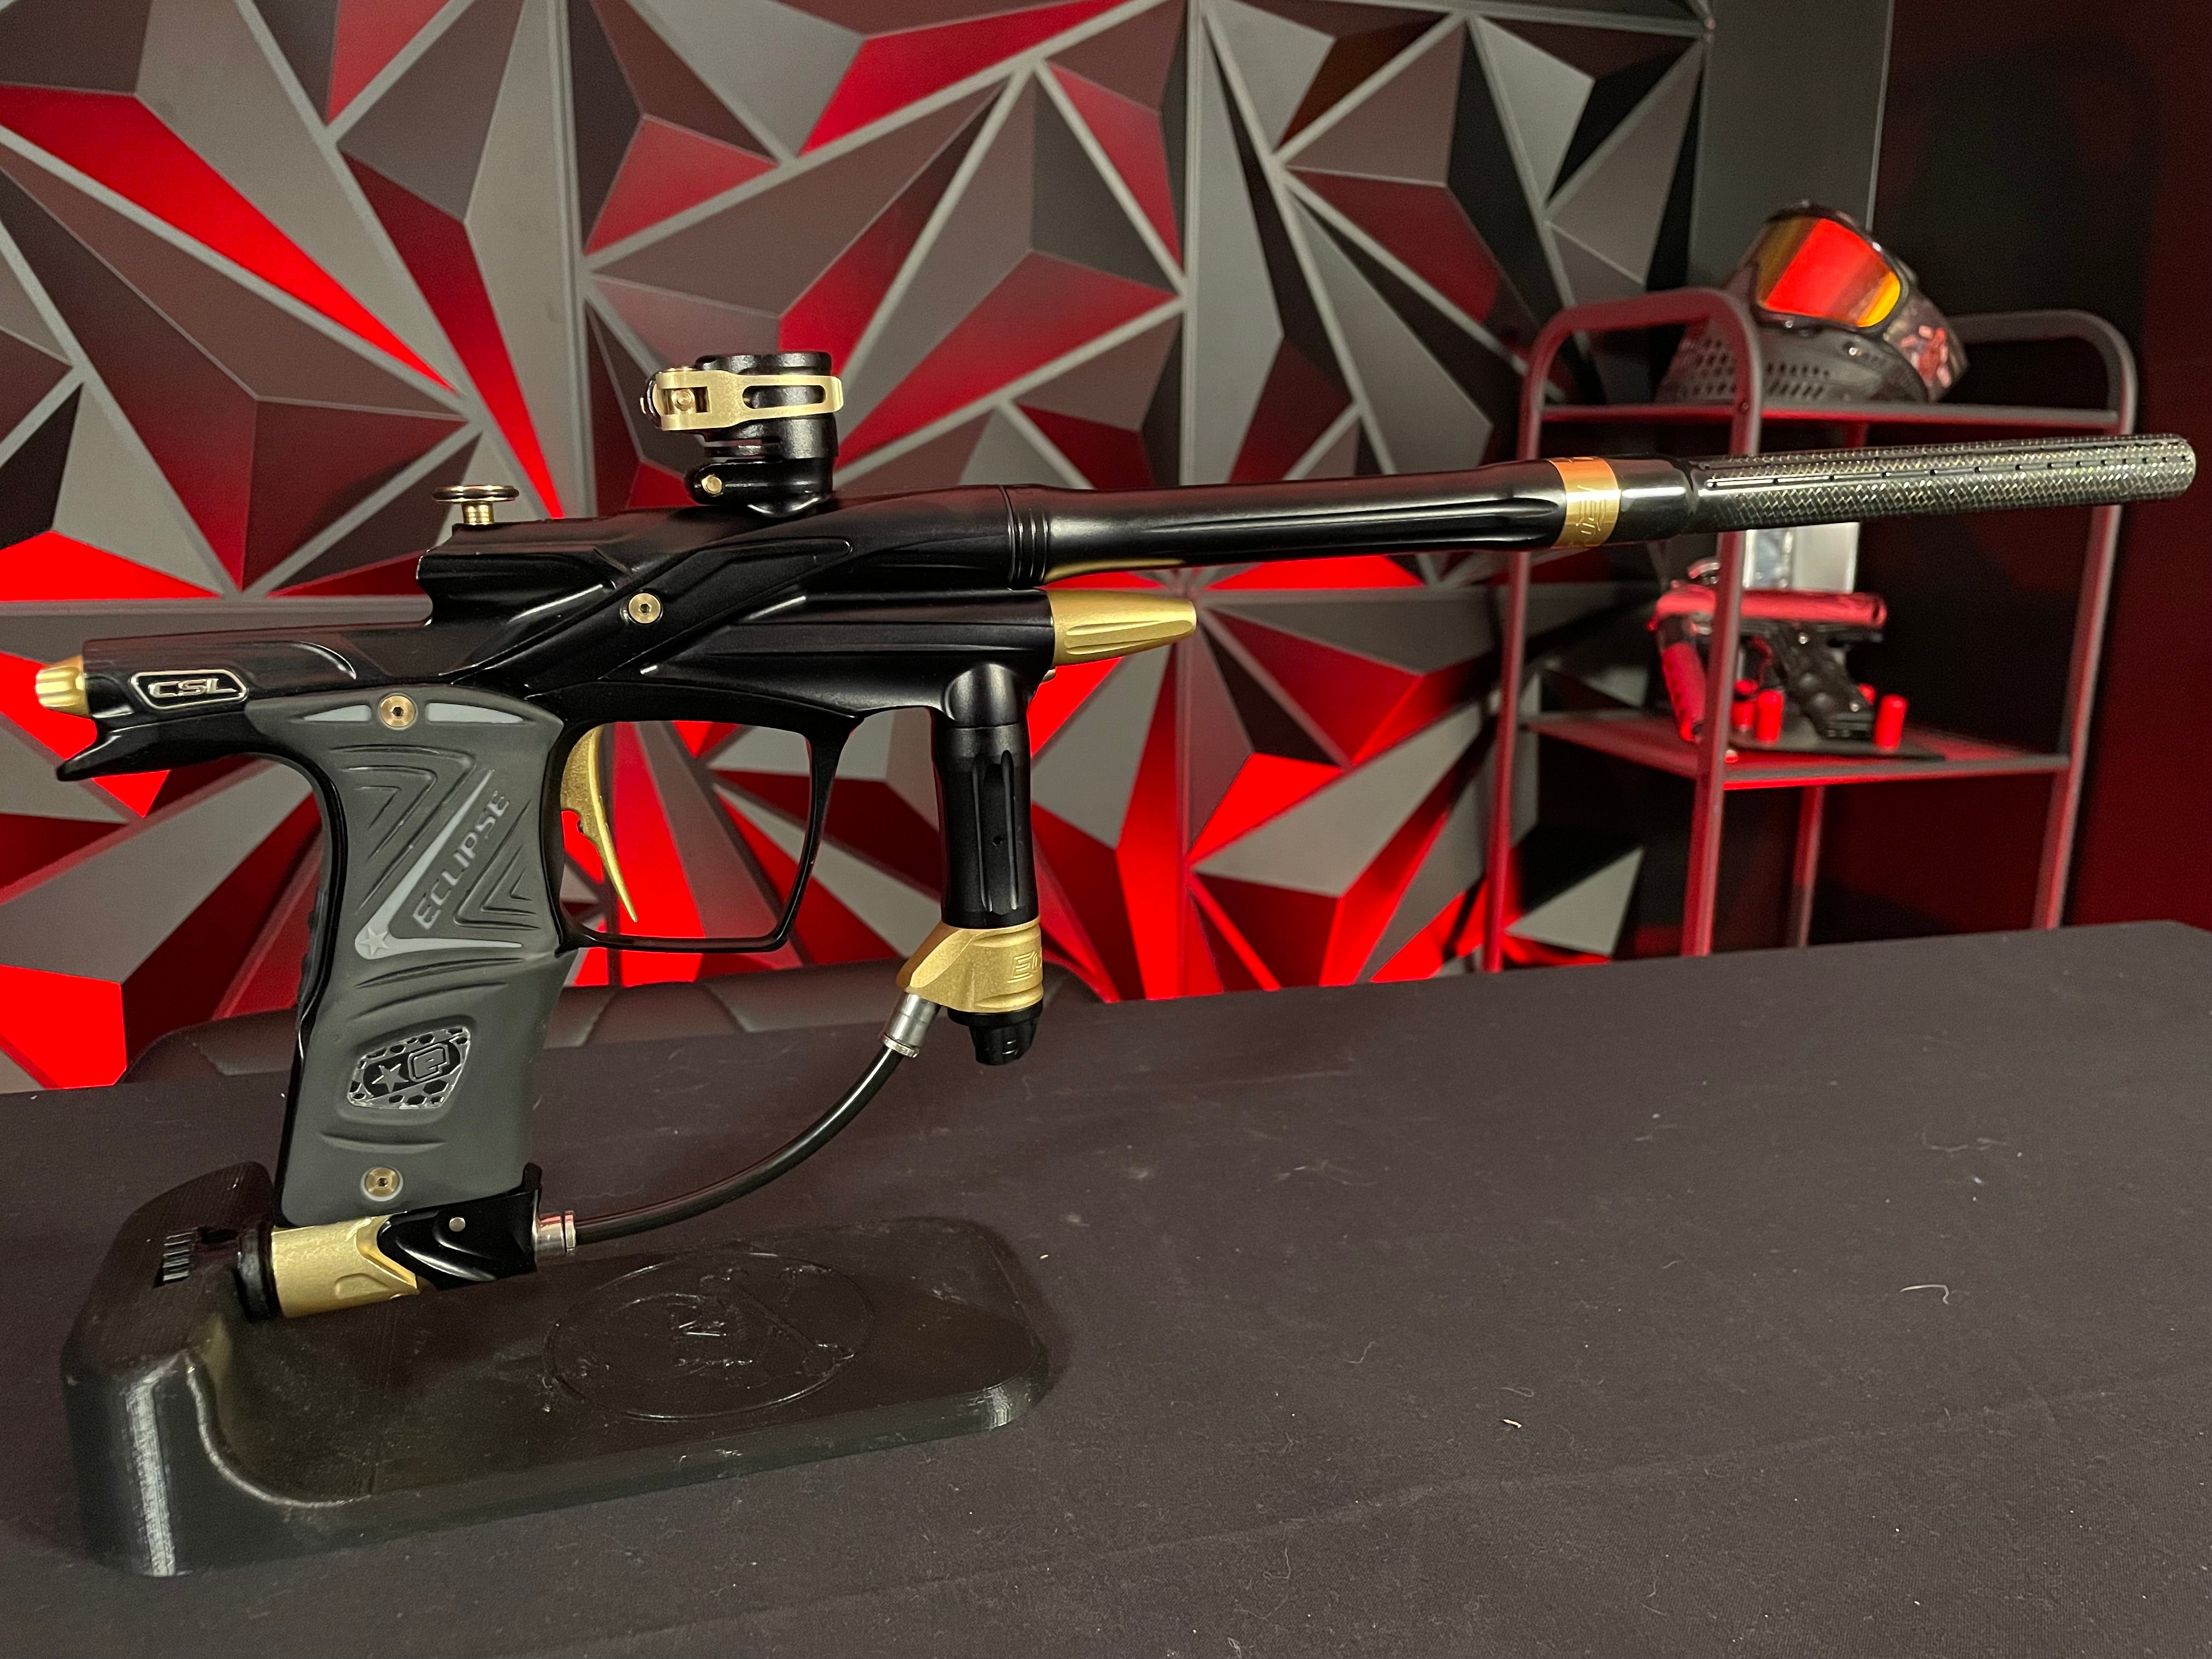 Used Planet Eclipse CSL Paintball Gun - Black/Gold w/14" & 16" Matching Carbon Fiber Tips, Blade and Scythe Trigger, & All 3 Barrel Backs